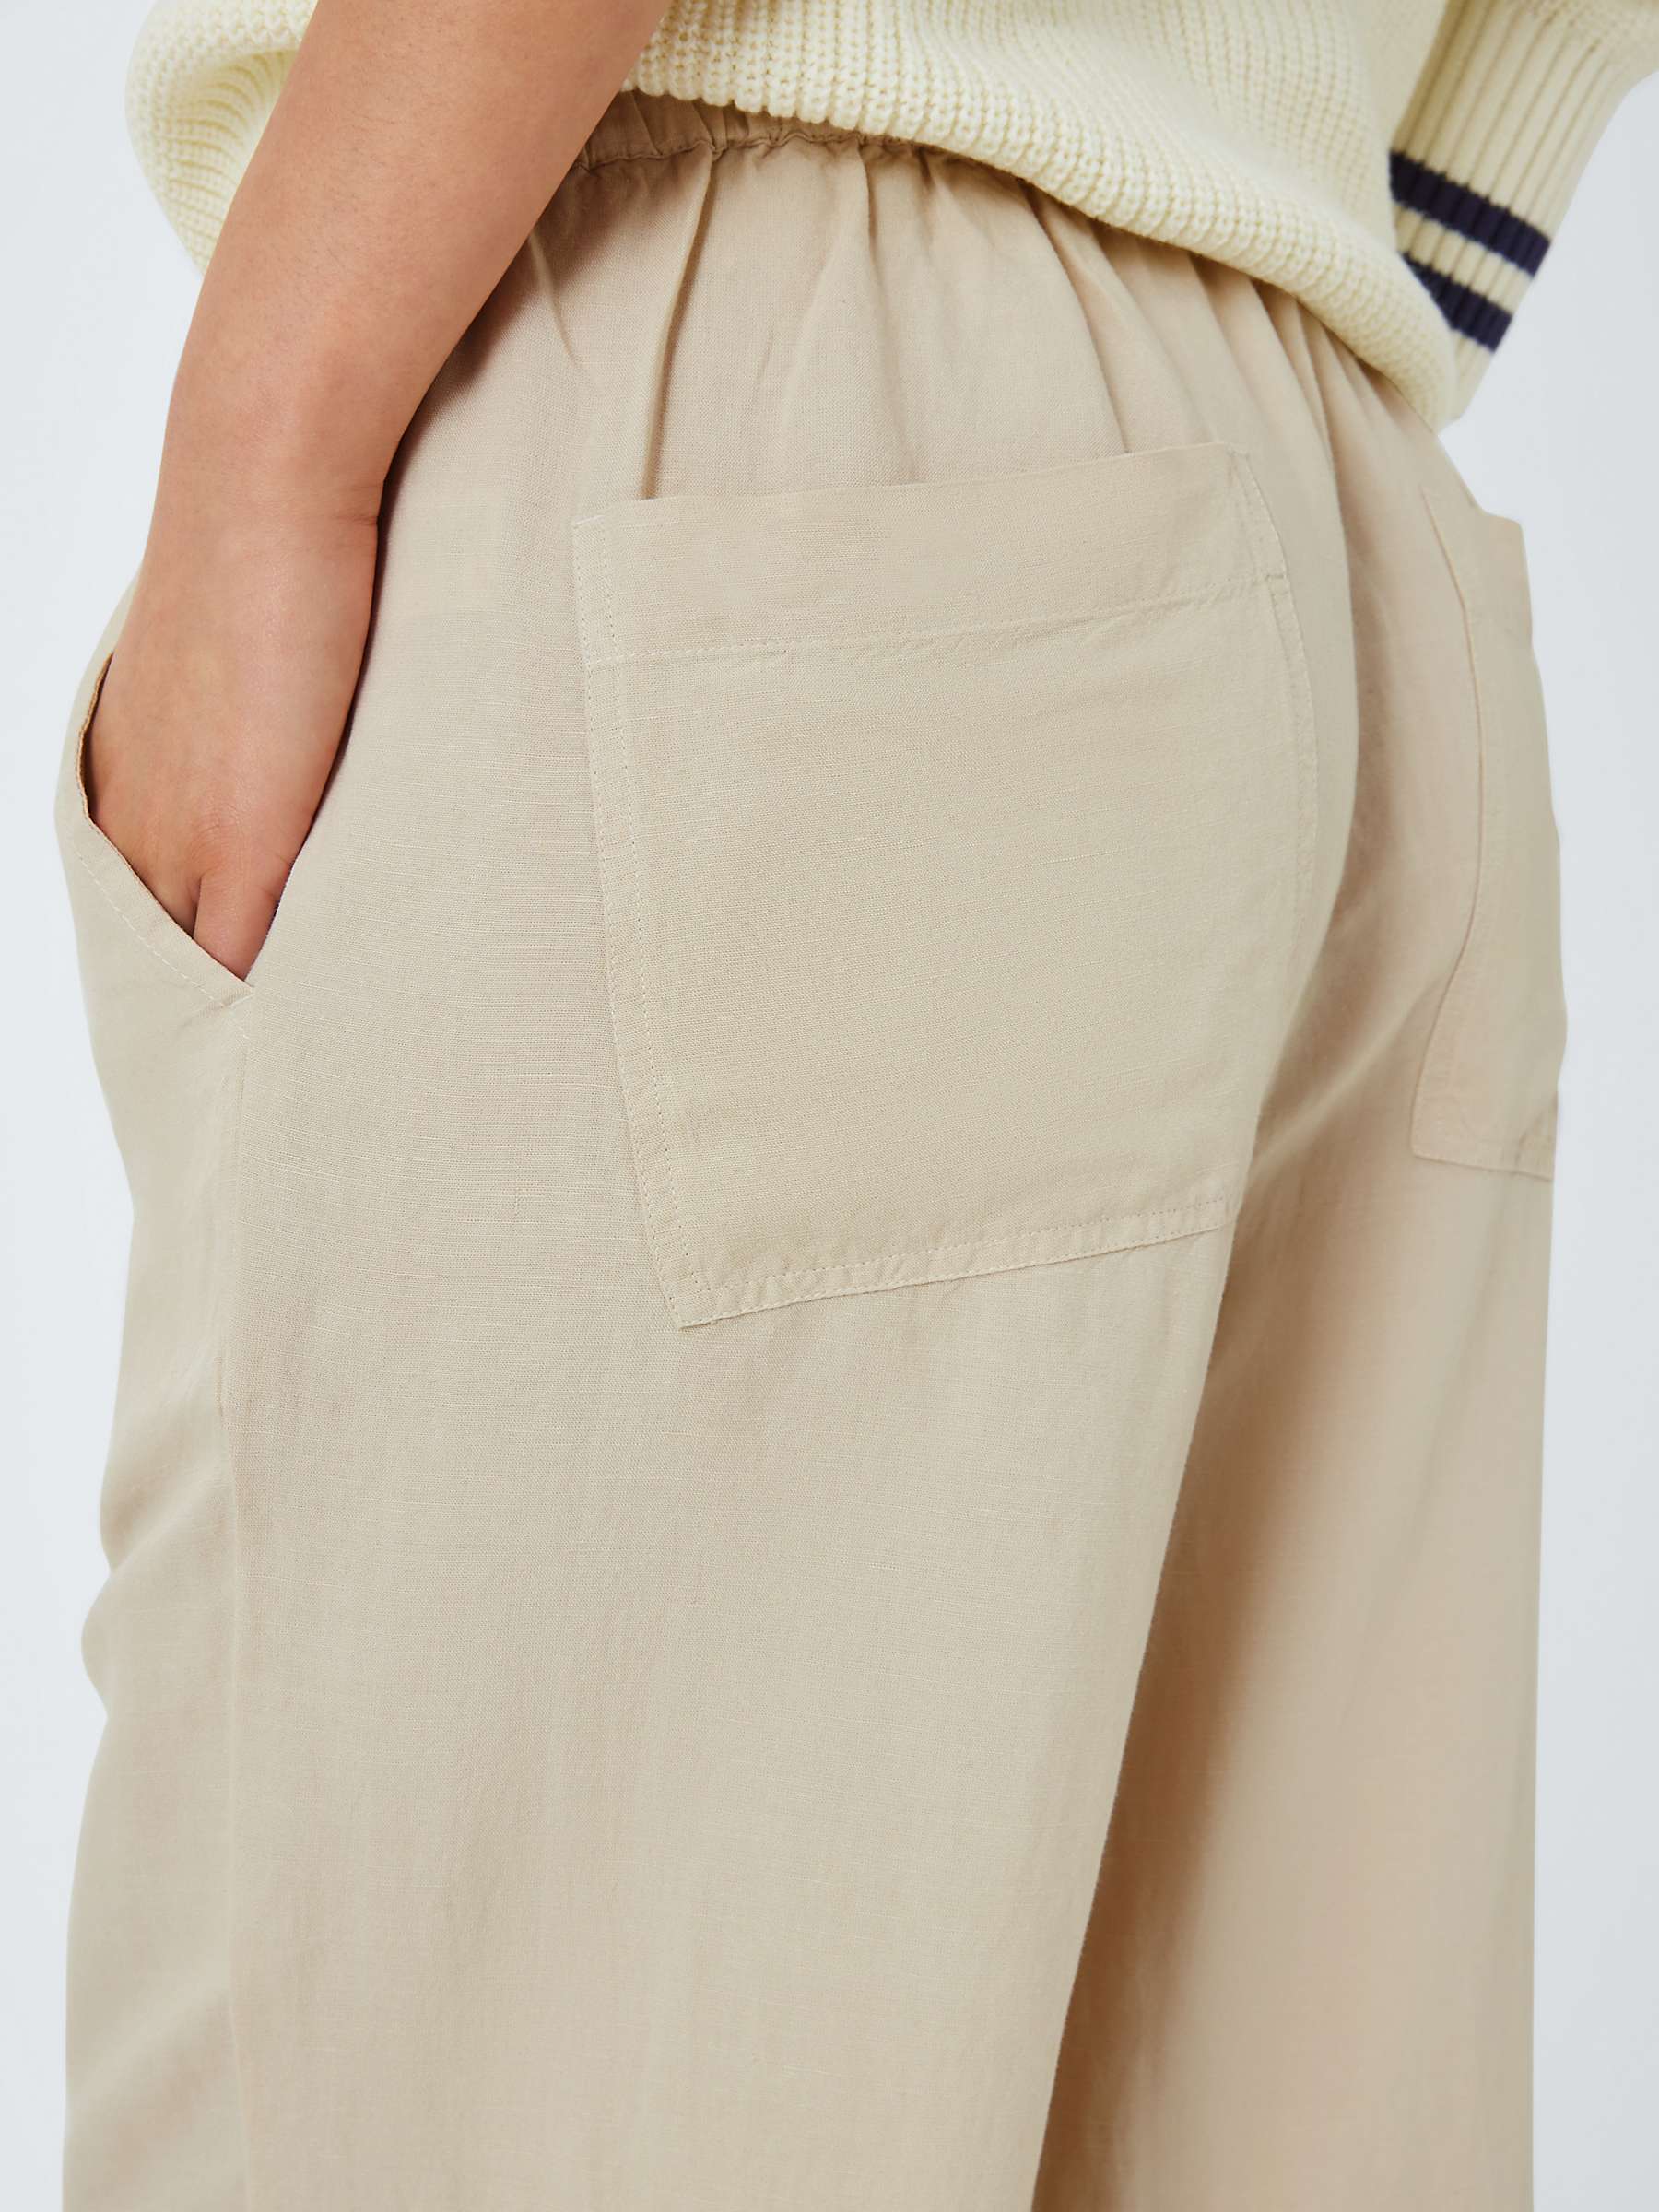 Buy John Lewis ANYDAY Plain Tailored Linen Blend Trousers, Oatmeal Online at johnlewis.com